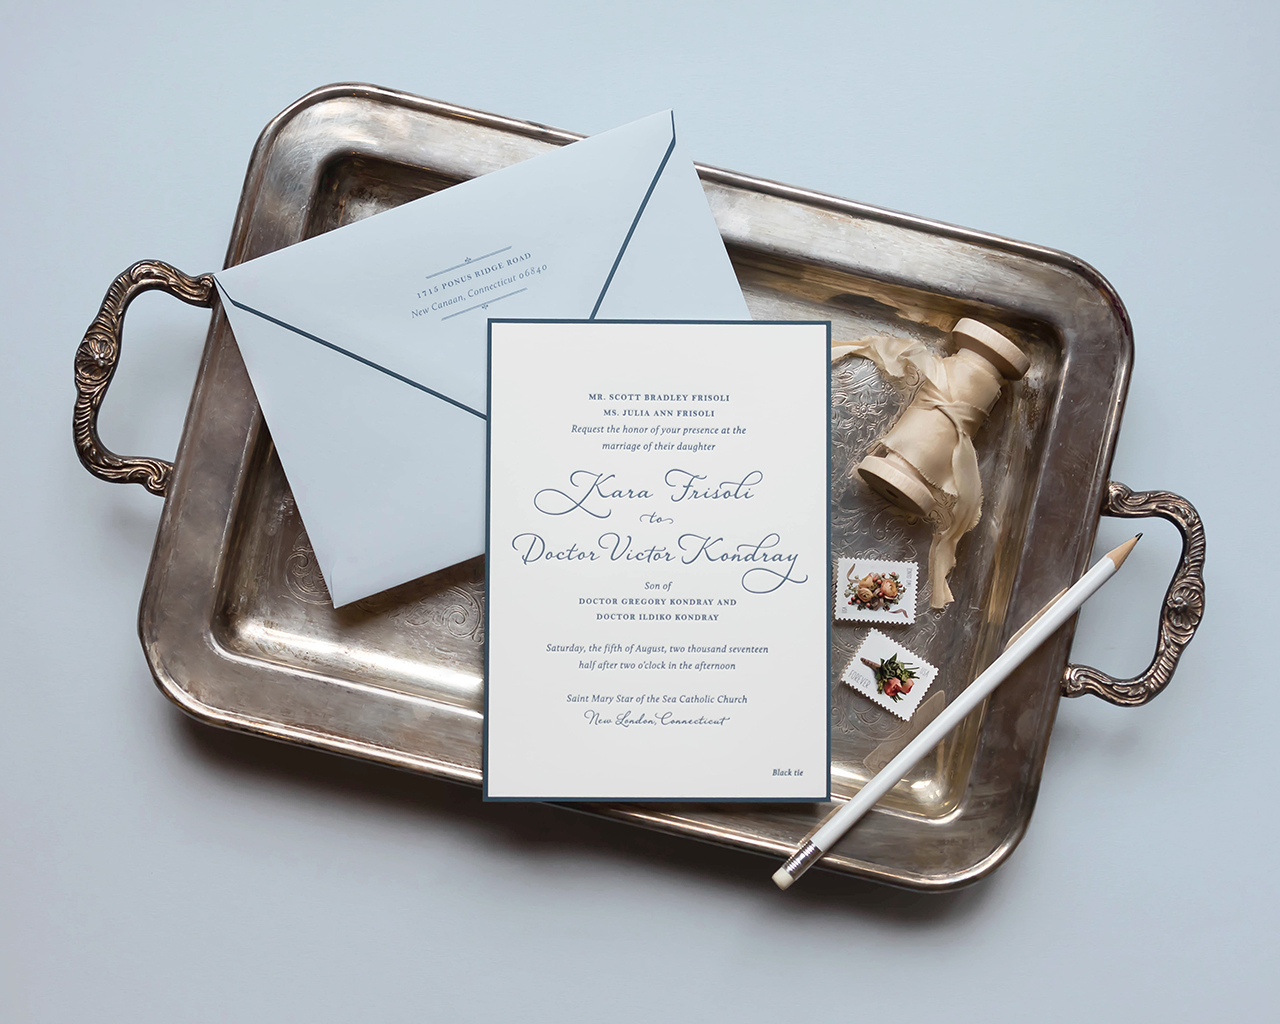 Classic Ocean-Inspired Wedding Invitations by Coral Pheasant